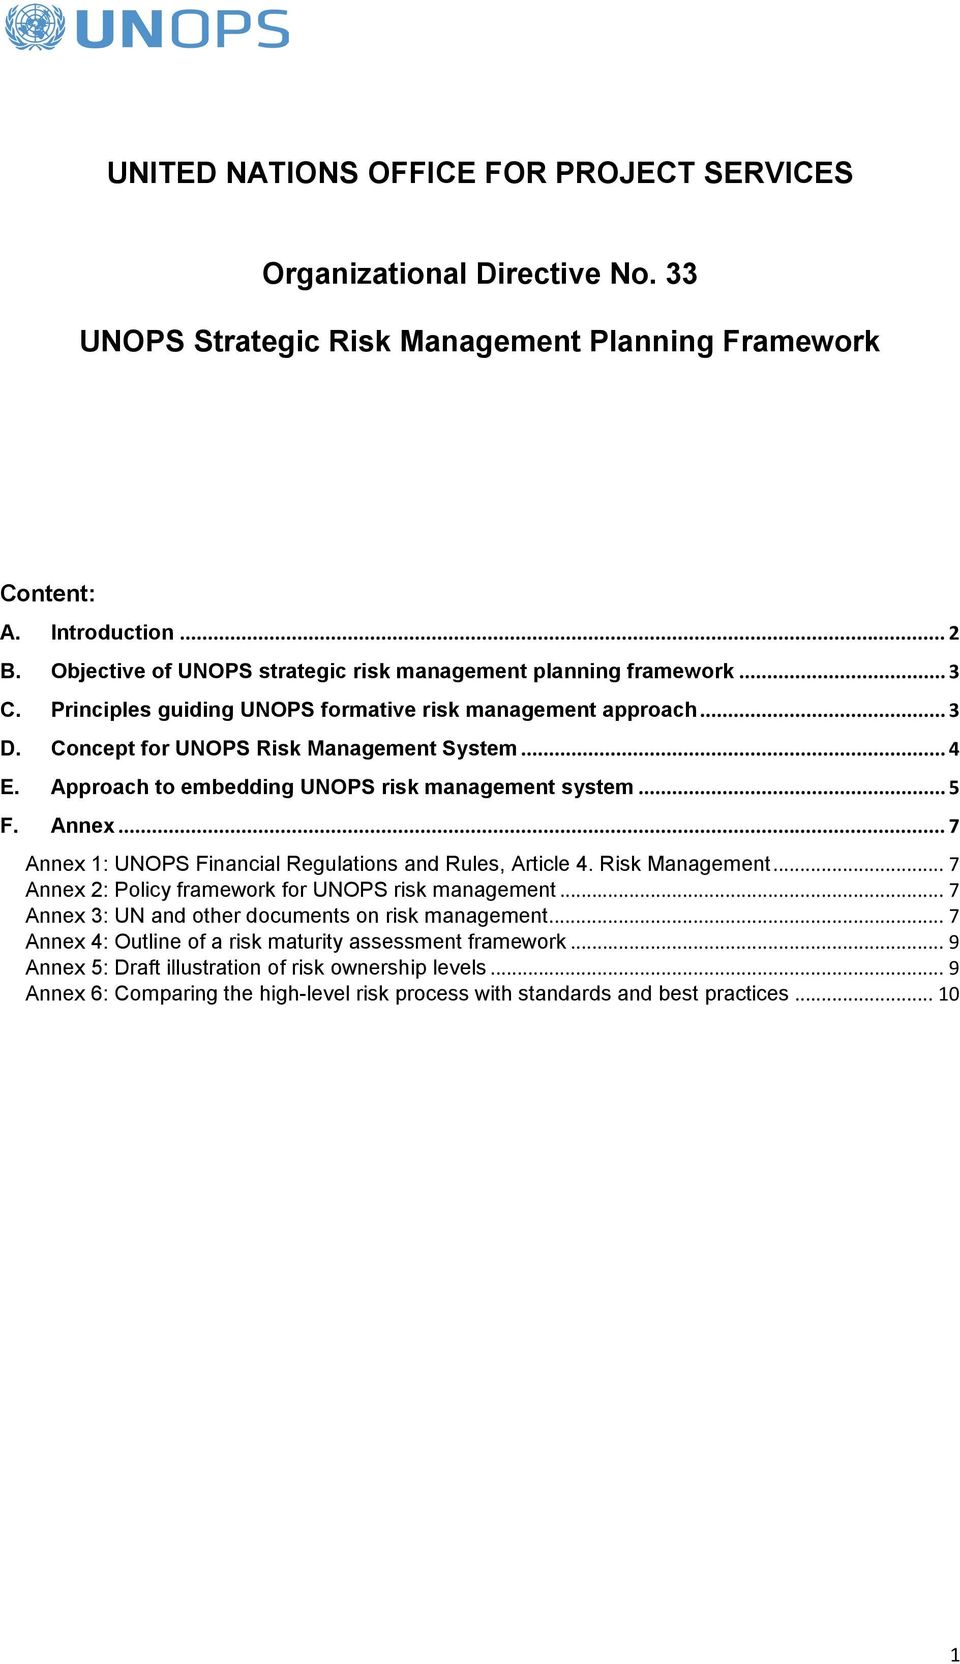 Approach to embedding UNOPS risk management system... 5 F. Annex... 7 Annex 1: UNOPS Financial Regulations and Rules, Article 4. Risk Management... 7 Annex 2: Policy framework for UNOPS risk management.